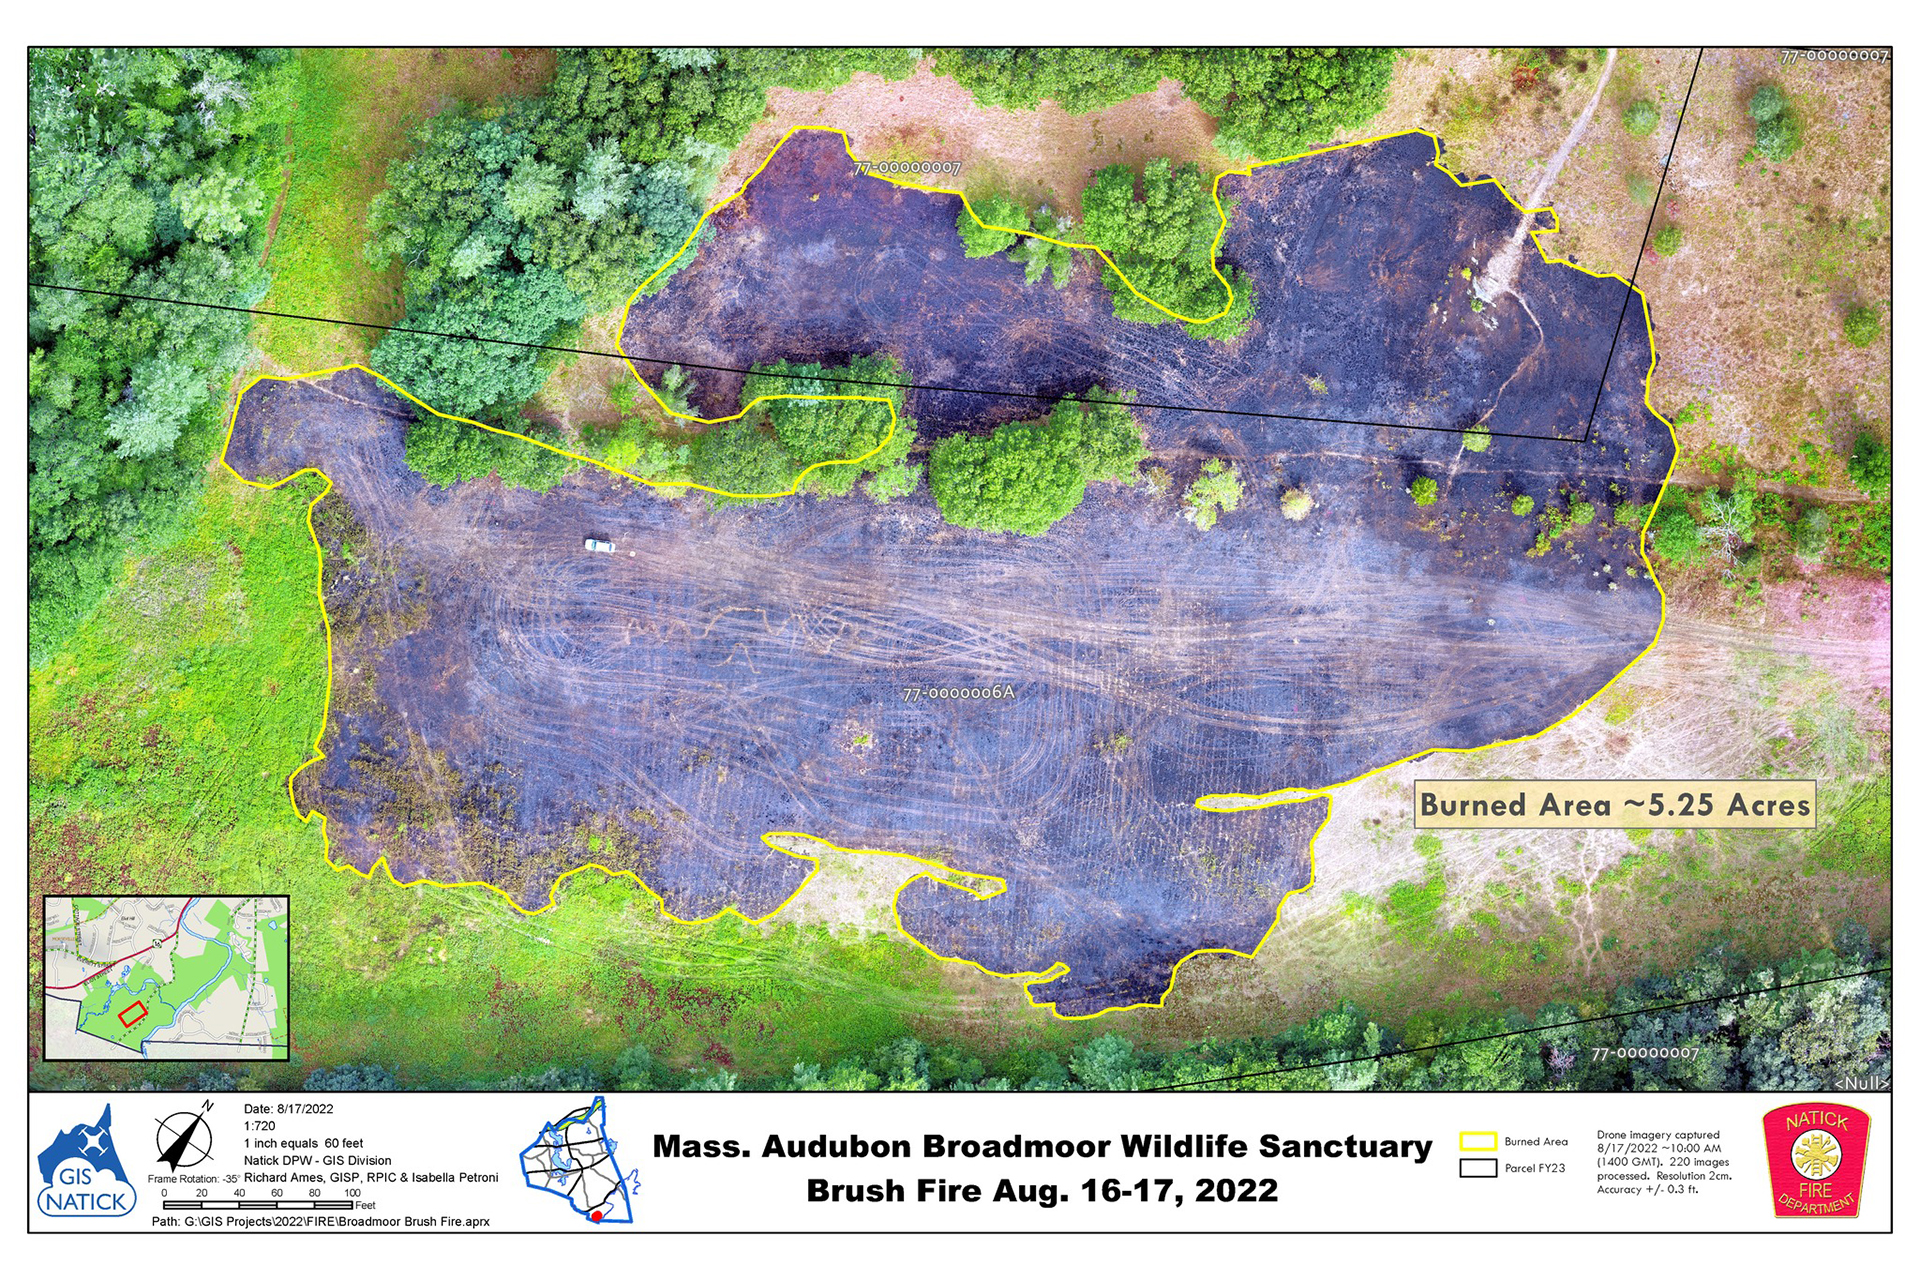 Aerial view of Broadmoor showing brush fire damage from August 16-17, 2022